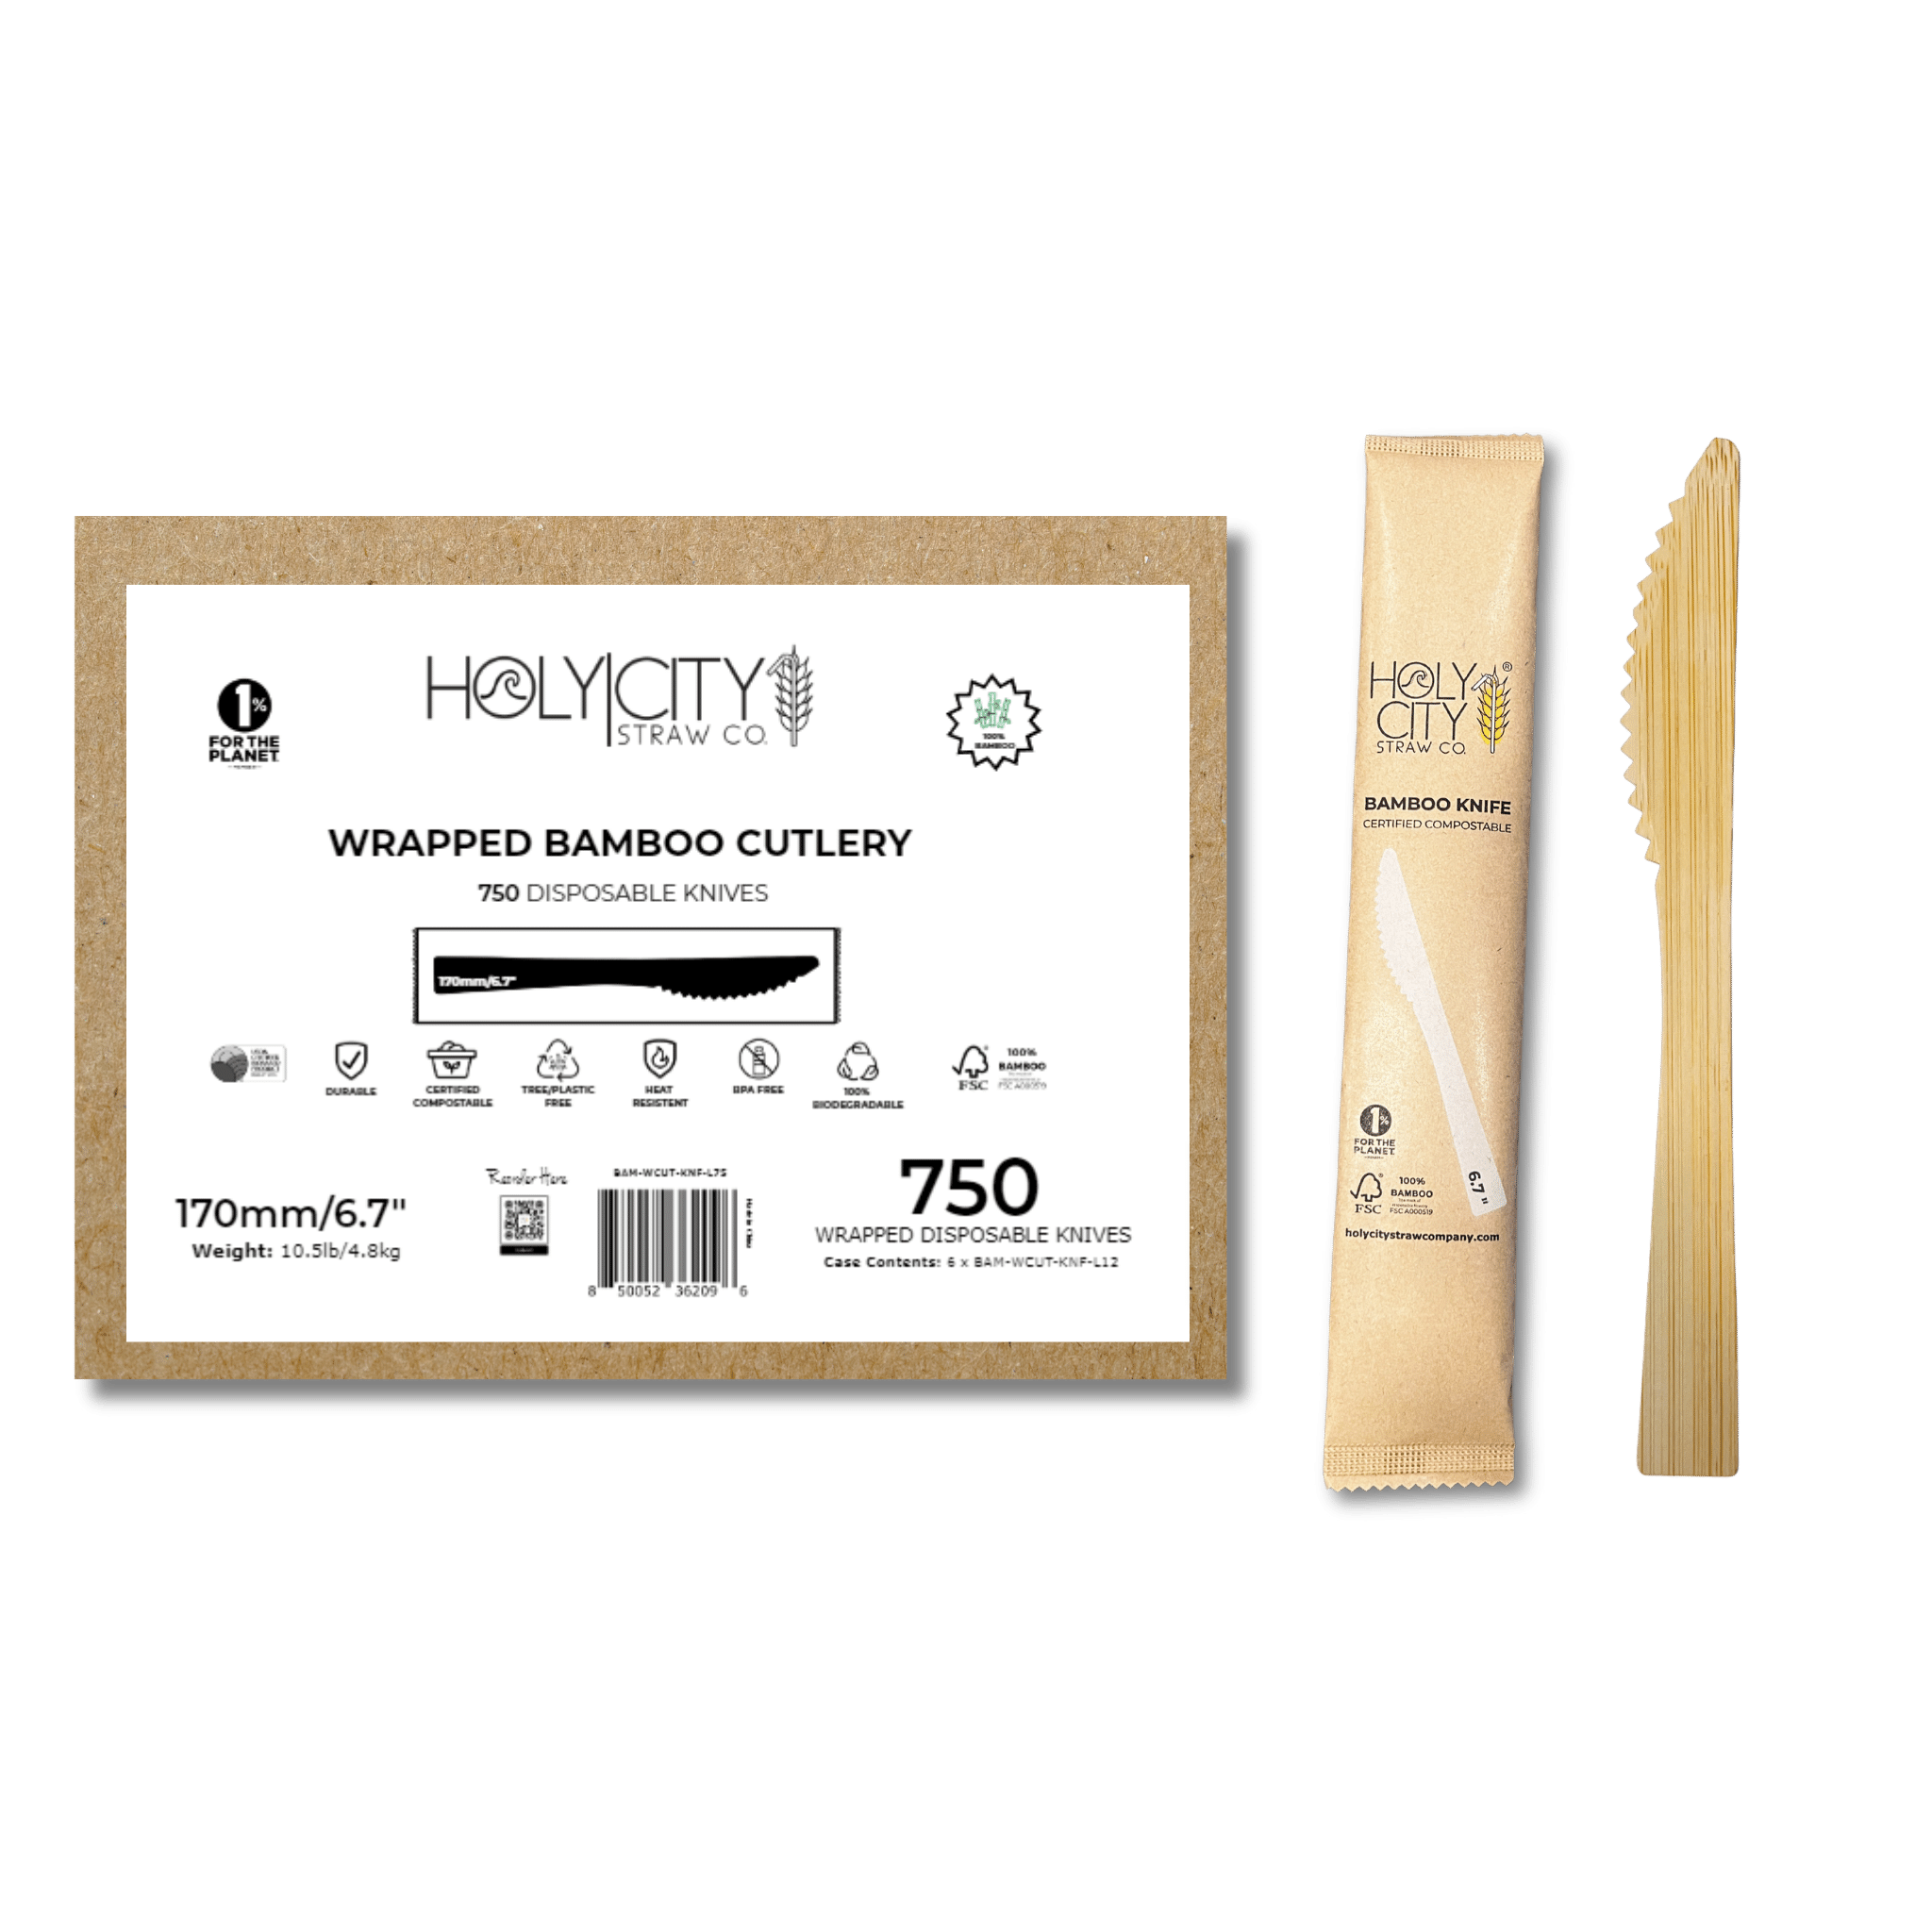 Case of Holy City Straw Company Wrapped Bamboo Knives 750 disposable knives each individually wrapped